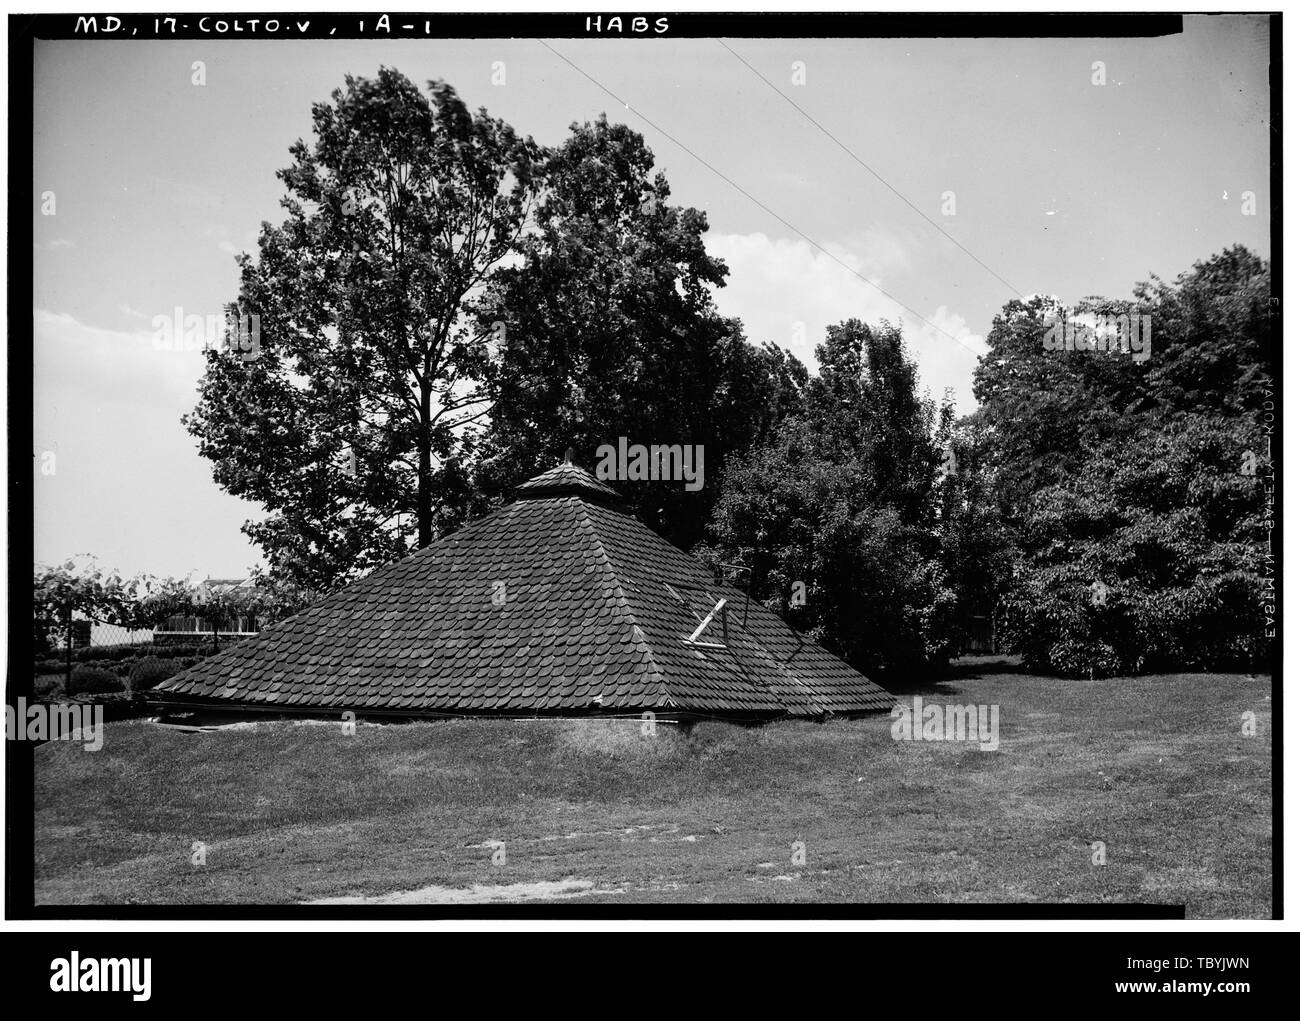 May 27, 1936 1105 A.M. VIEW OF ICE HOUSE FROM NORTHEAST.  Belair, Tulip Grove Drive, BelairatBowie, Bowie, Prince George's County, MD Ogle, Samuel Tasker, Benjamin Tasker, Benjamin Franklin, Benjamin Sharpe, Horatio Ogle, Benjamin Woodward, James T Levitt and Sons Klugh, Terra, transmitter Brostrup, John O, photographer Nichols, Frederick D, photographer Boucher, Jack, photographer Klugh, Terra, historian Price, Virginia B, transmitter Stock Photo